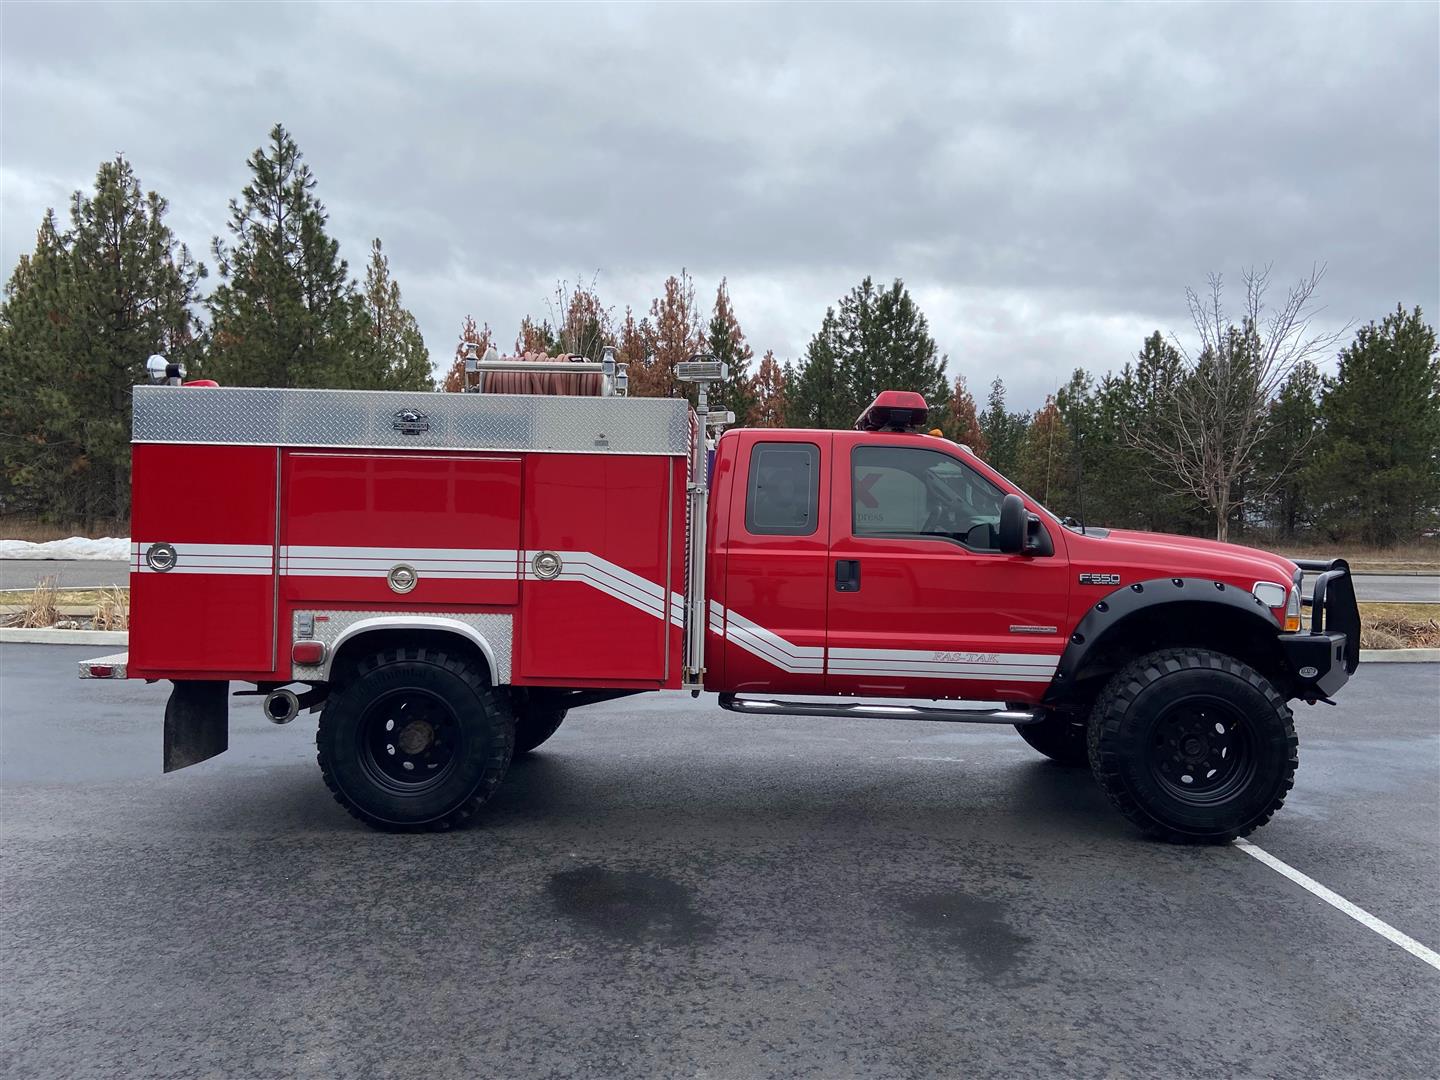 Check Our Newest Fire & Rescue Brush Truck!